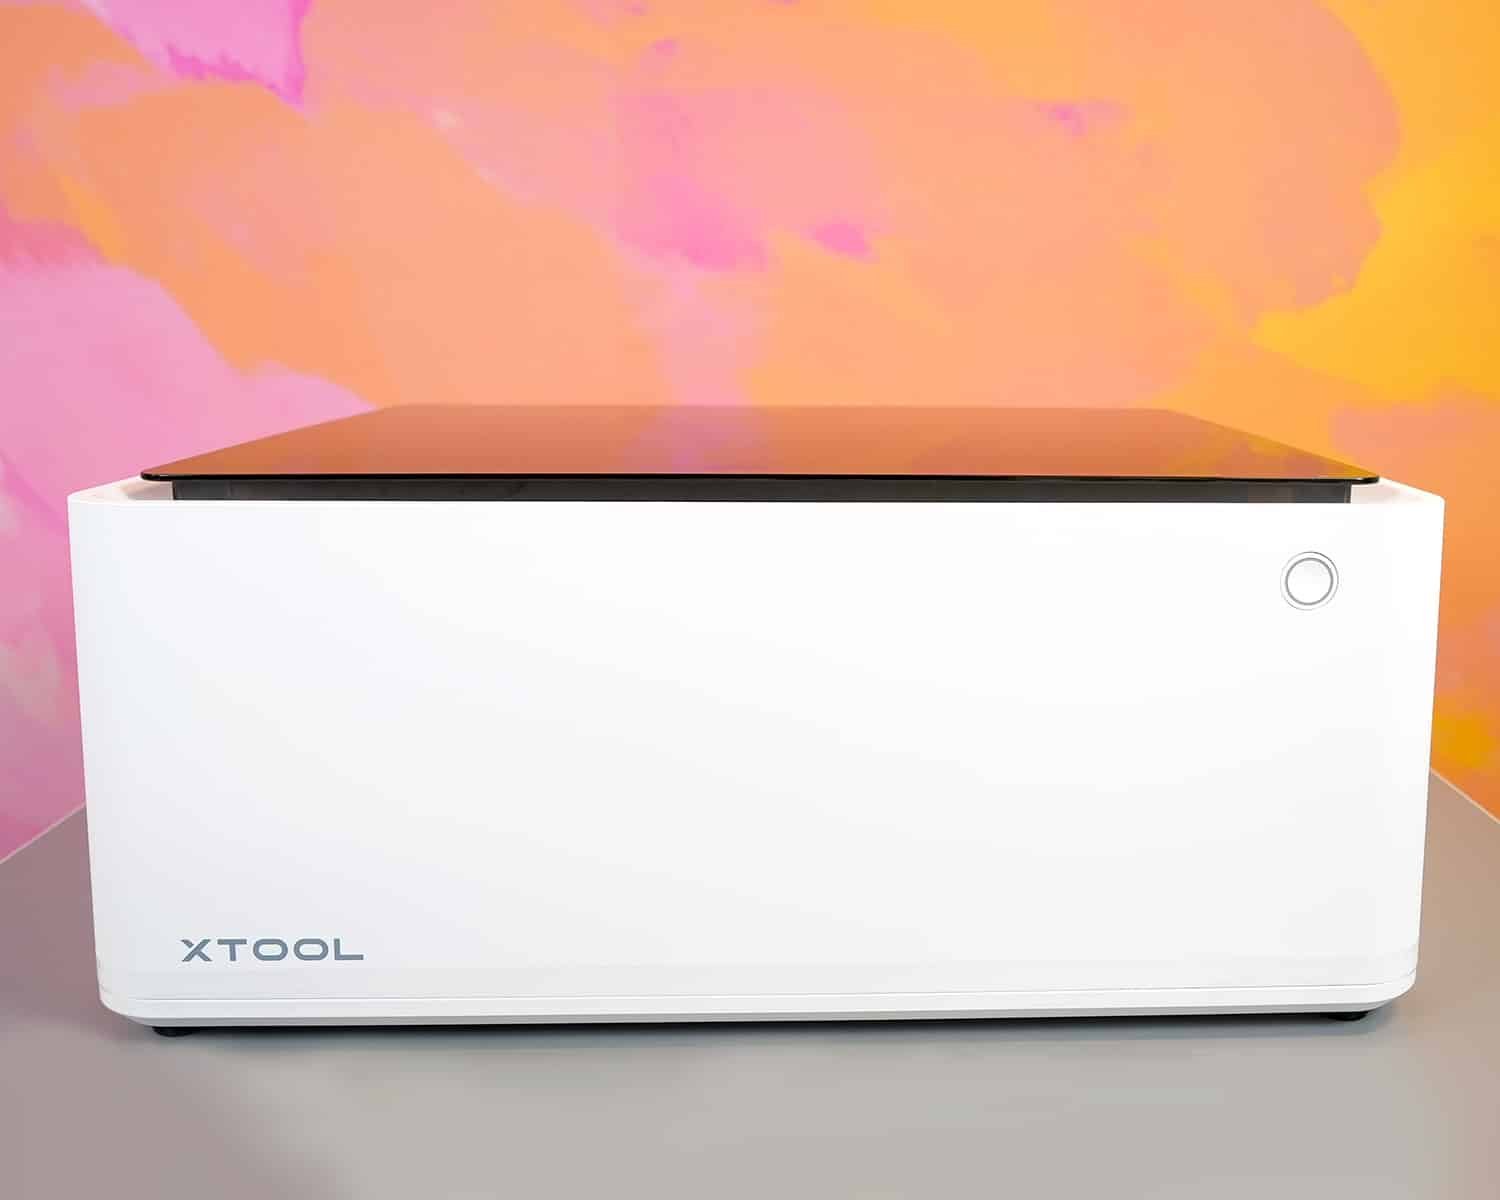 xTool M1 10w laser in front of a colorful pink, orange, and yellow wall